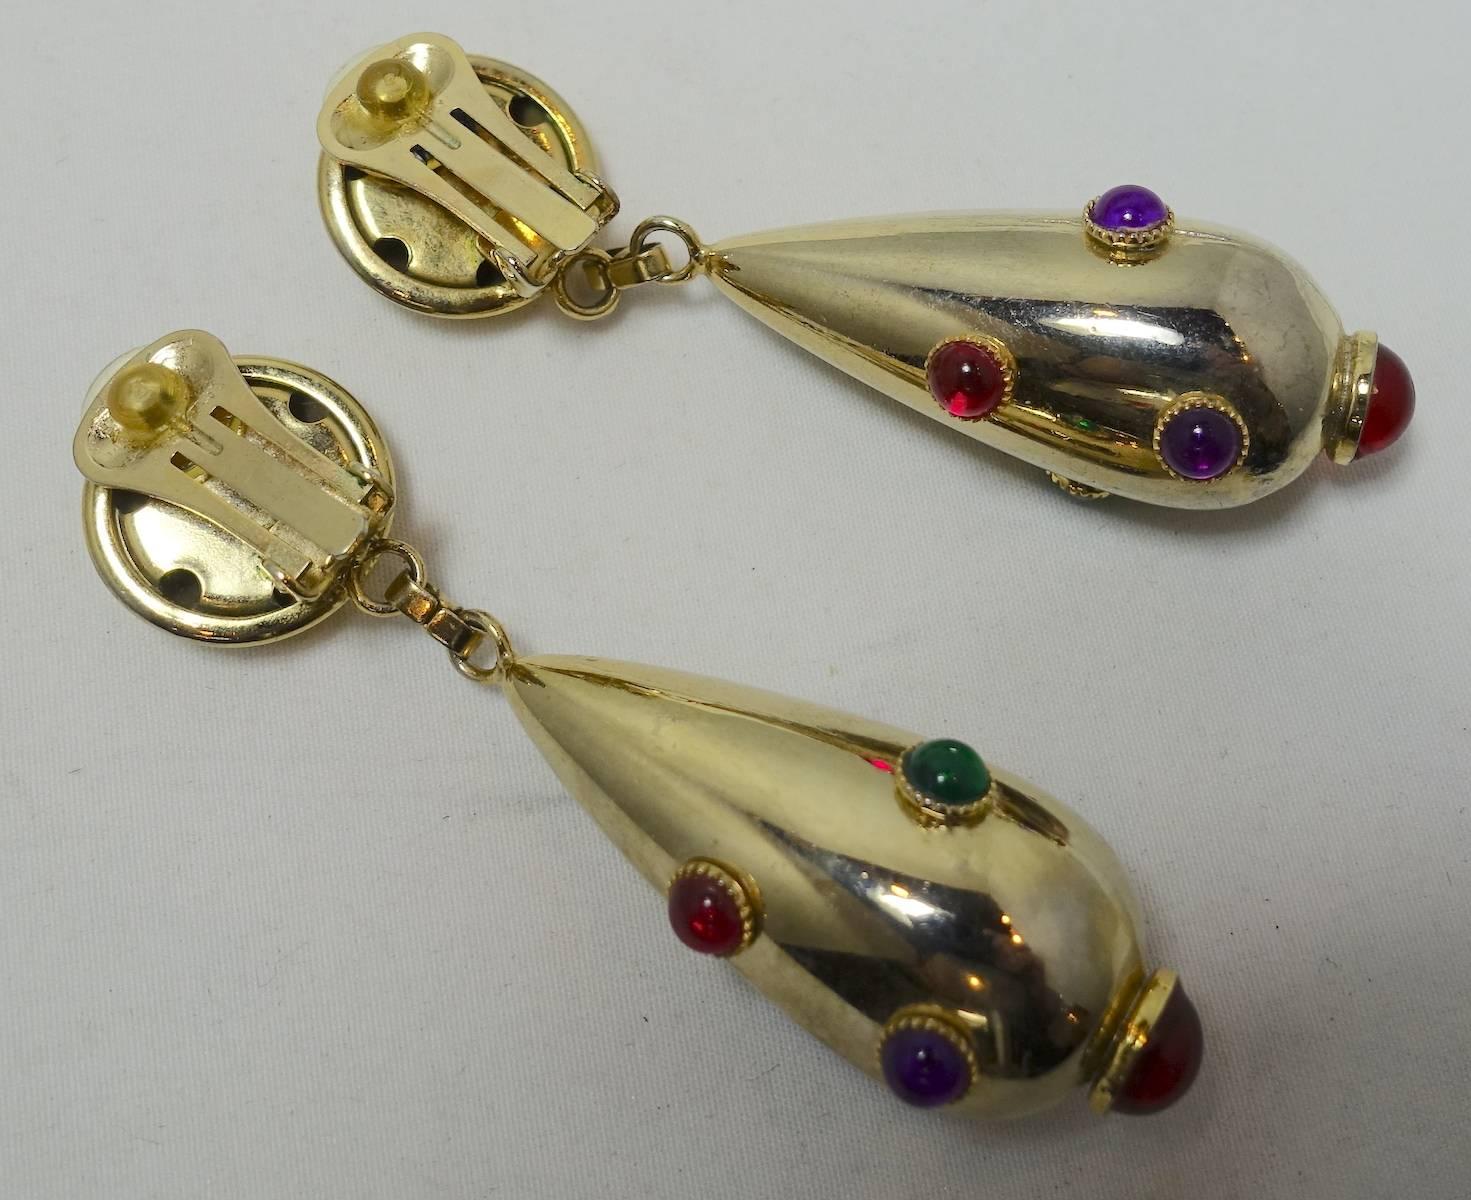 These vintage 1970s drop earrings are designed with cabochon red, green, blue and amethyst crystals in a gold-tone setting.  These clip earrings measure 3” x 1” and are in excellent condition.